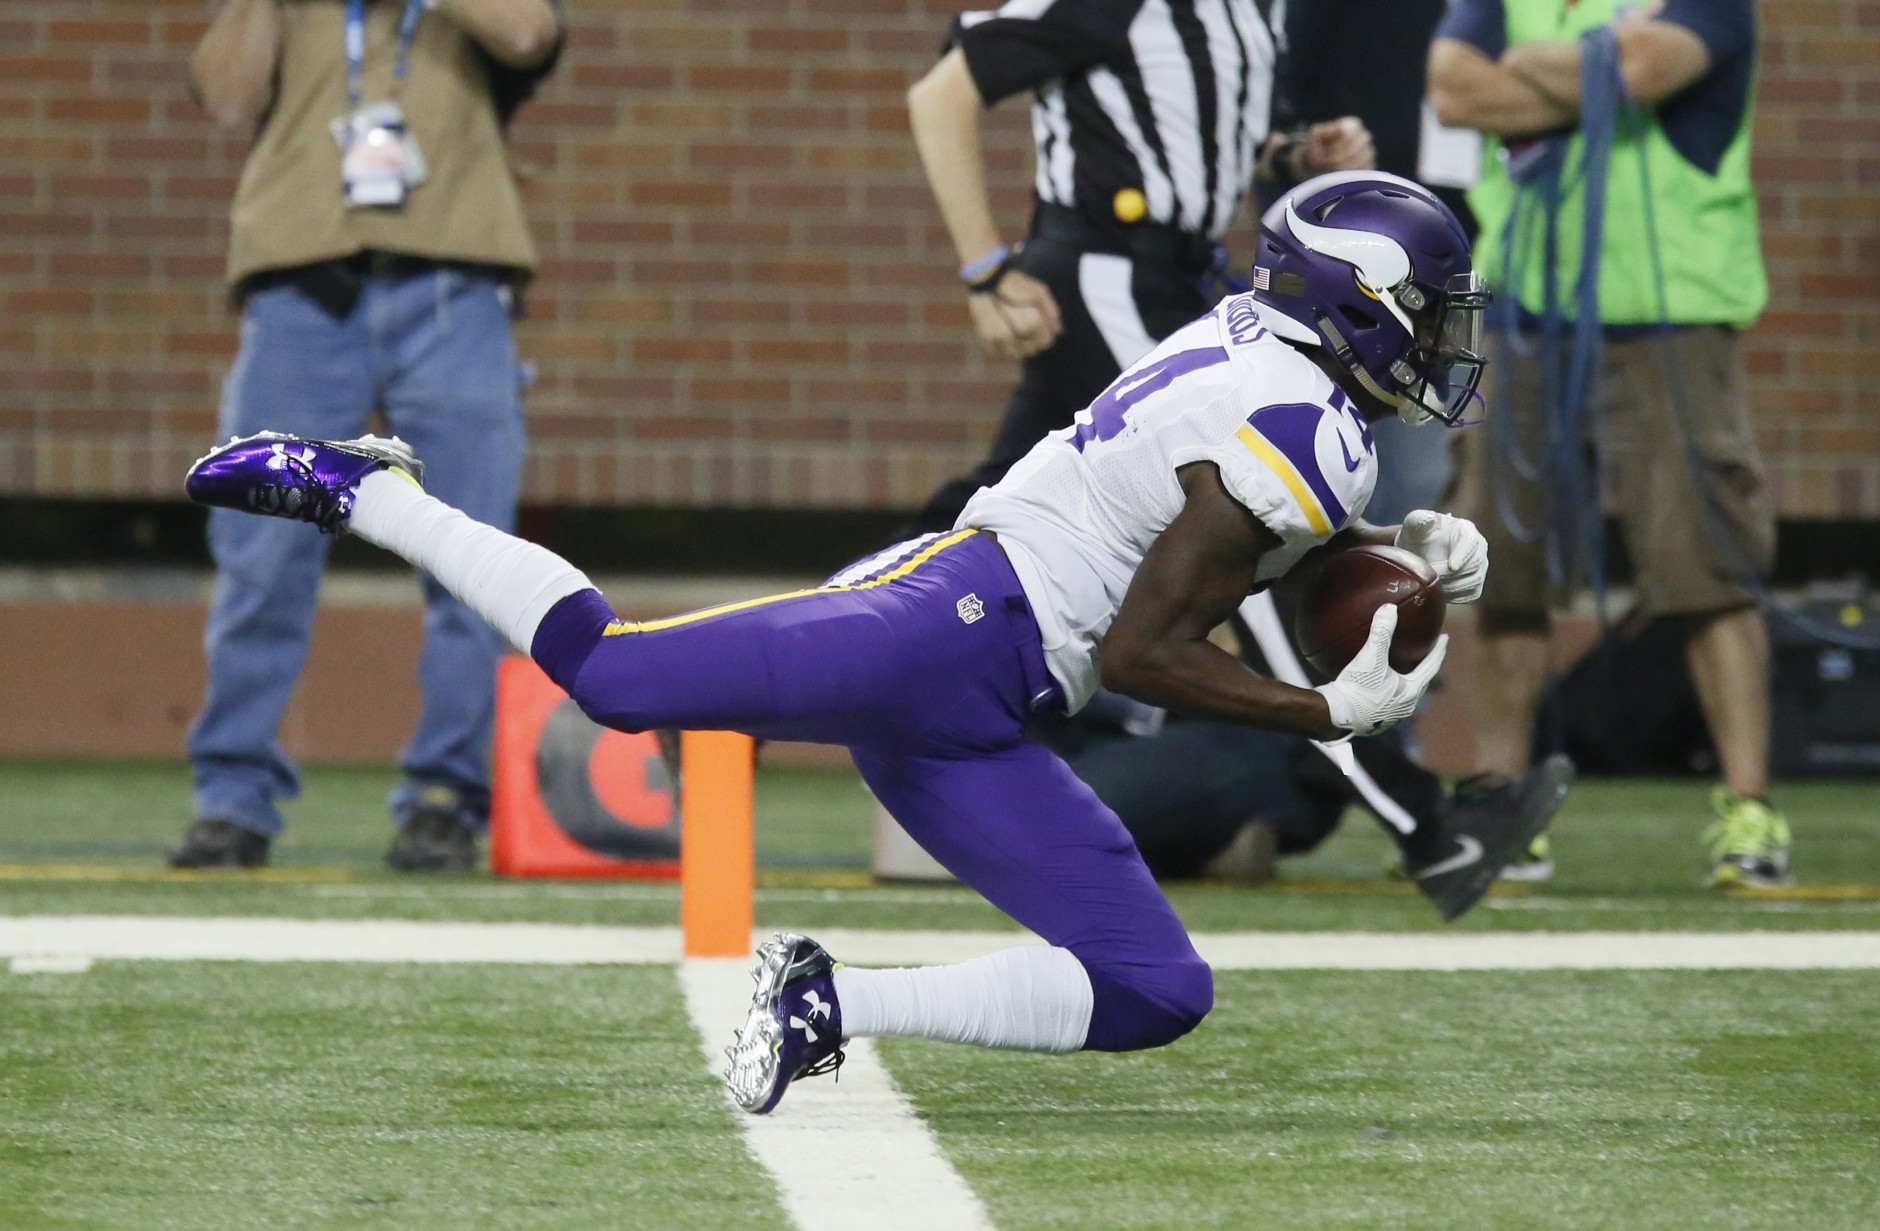 Minnesota Vikings wide receiver Stefon Diggs (14) falls into the end zone after a 36-yard reception for a touchdown during the second half of an NFL football game against the Detroit Lions, Sunday, Oct. 25, 2015, in Detroit. (AP Photo/Duane Burleson)